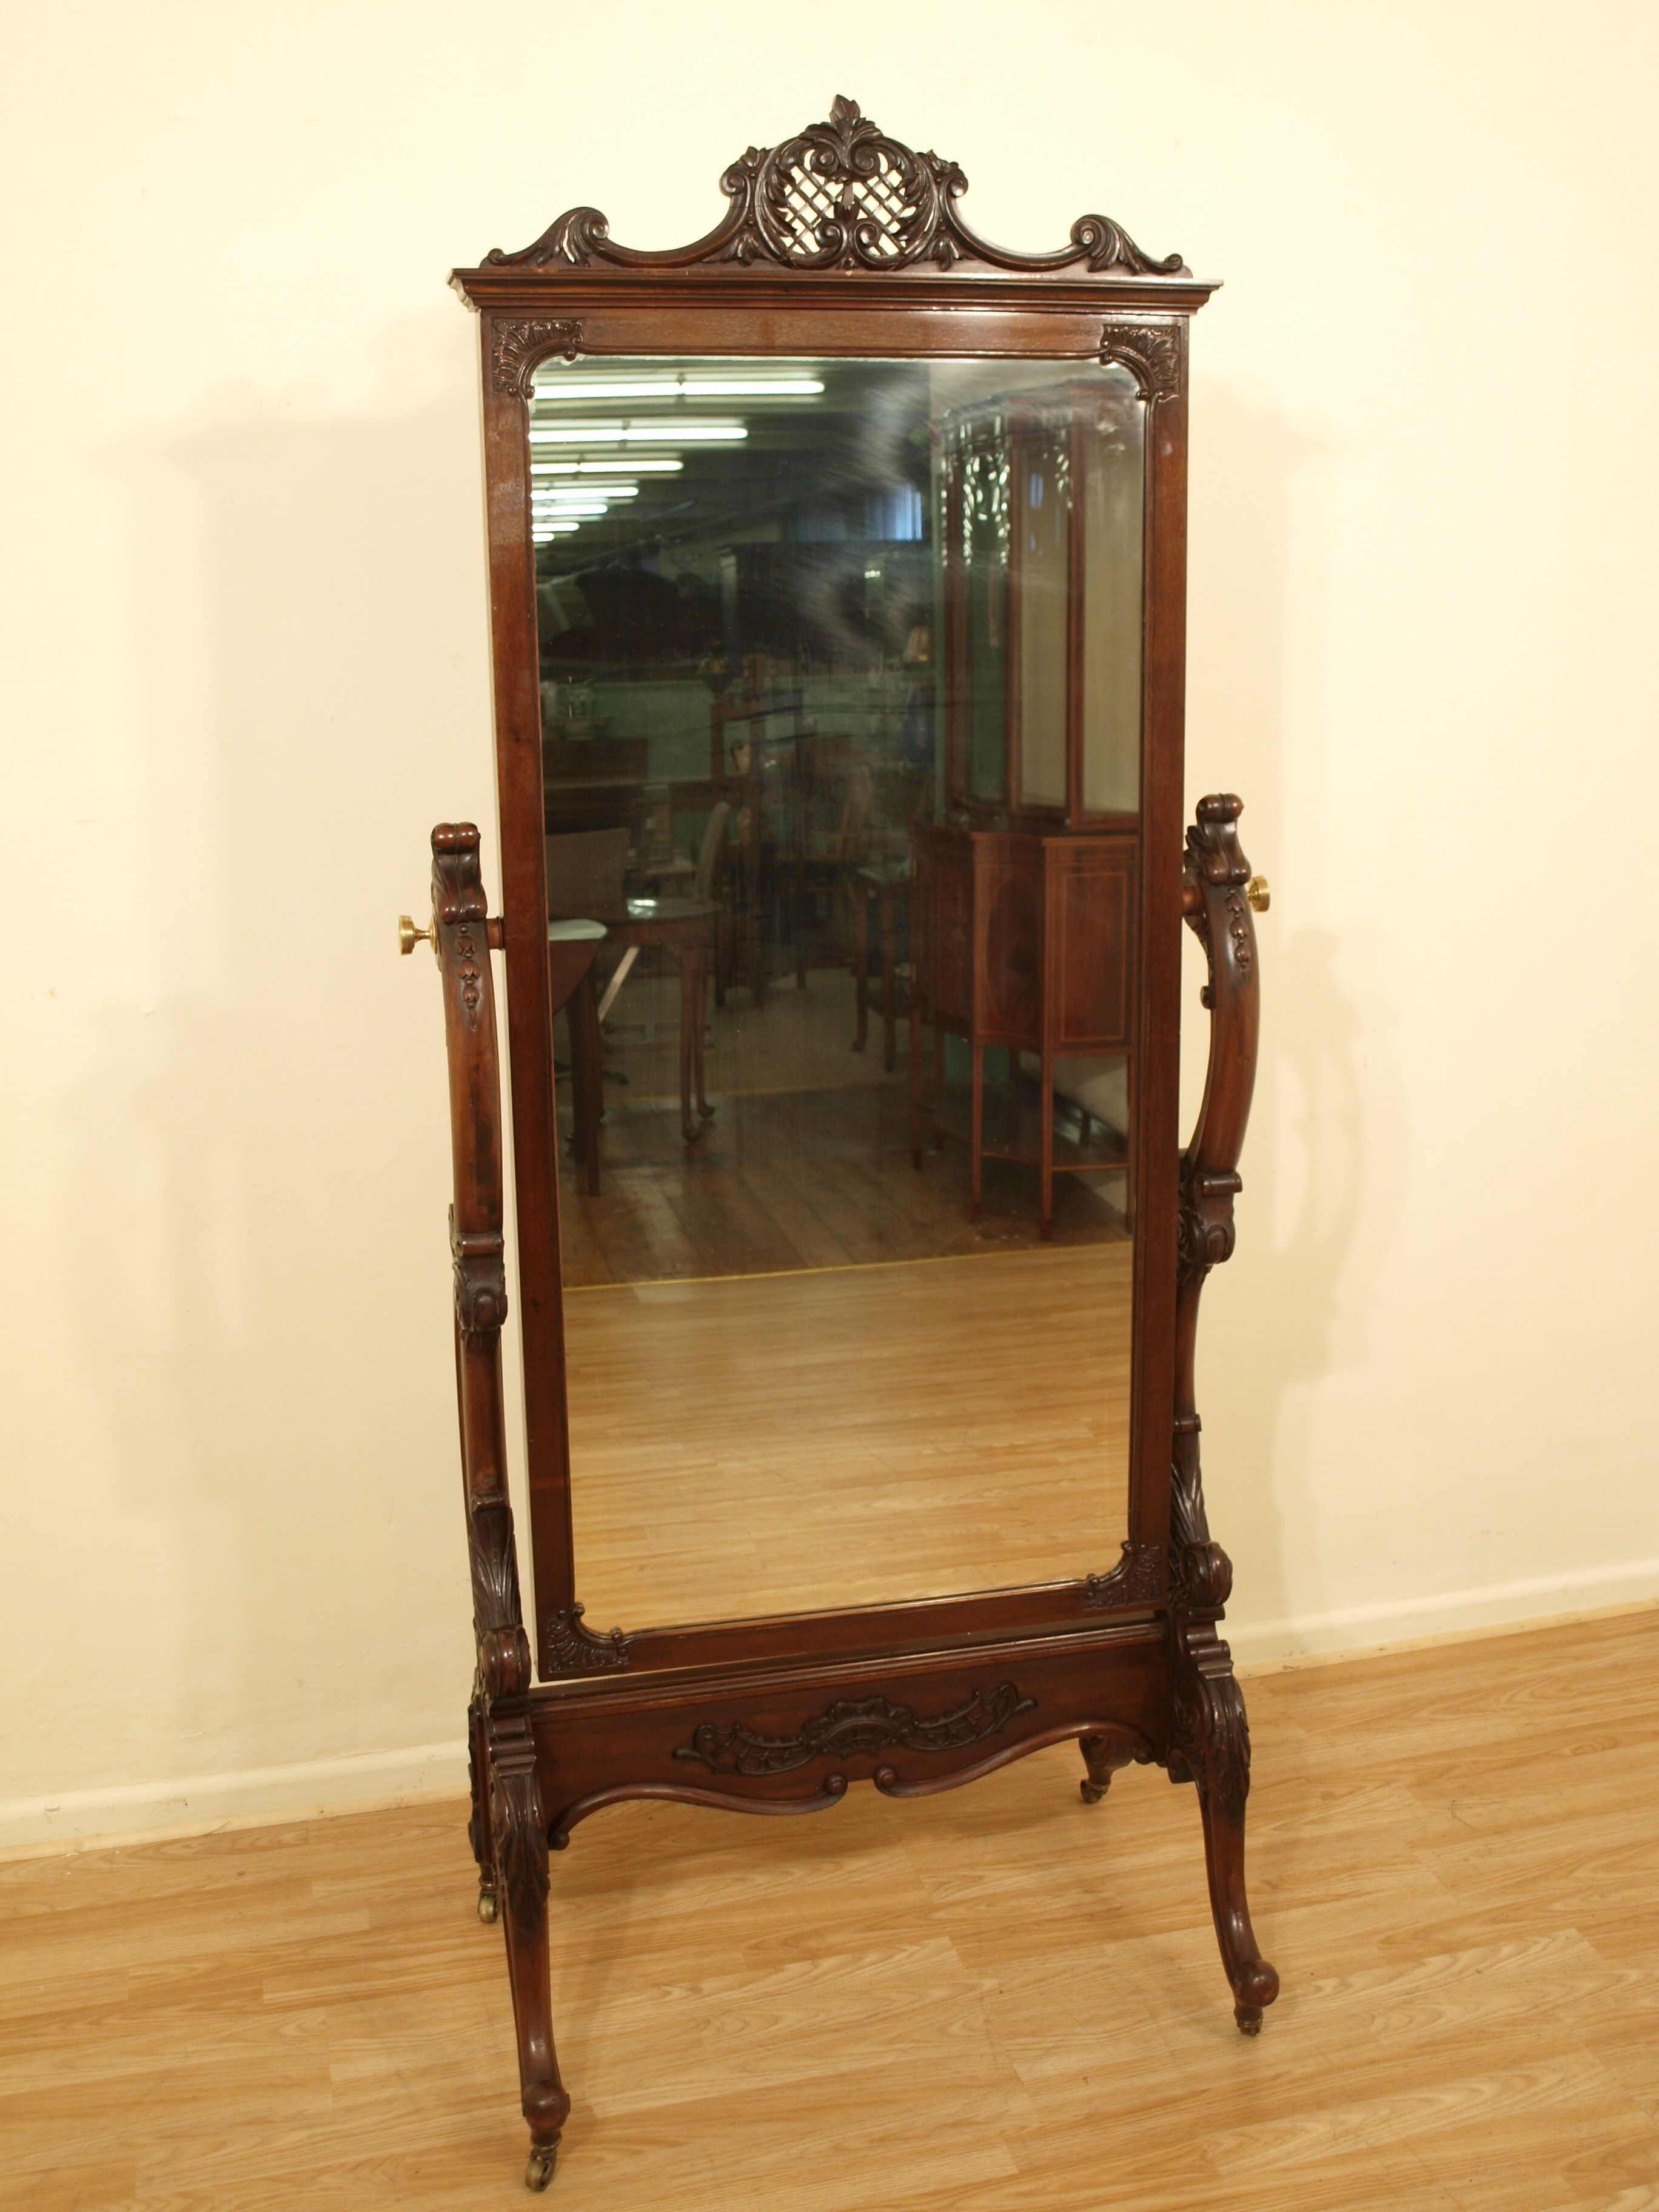 Chavel Mirror Cheval Mirror Pinterest Cheval Mirror Inside Antique Free Standing Mirror (View 10 of 15)